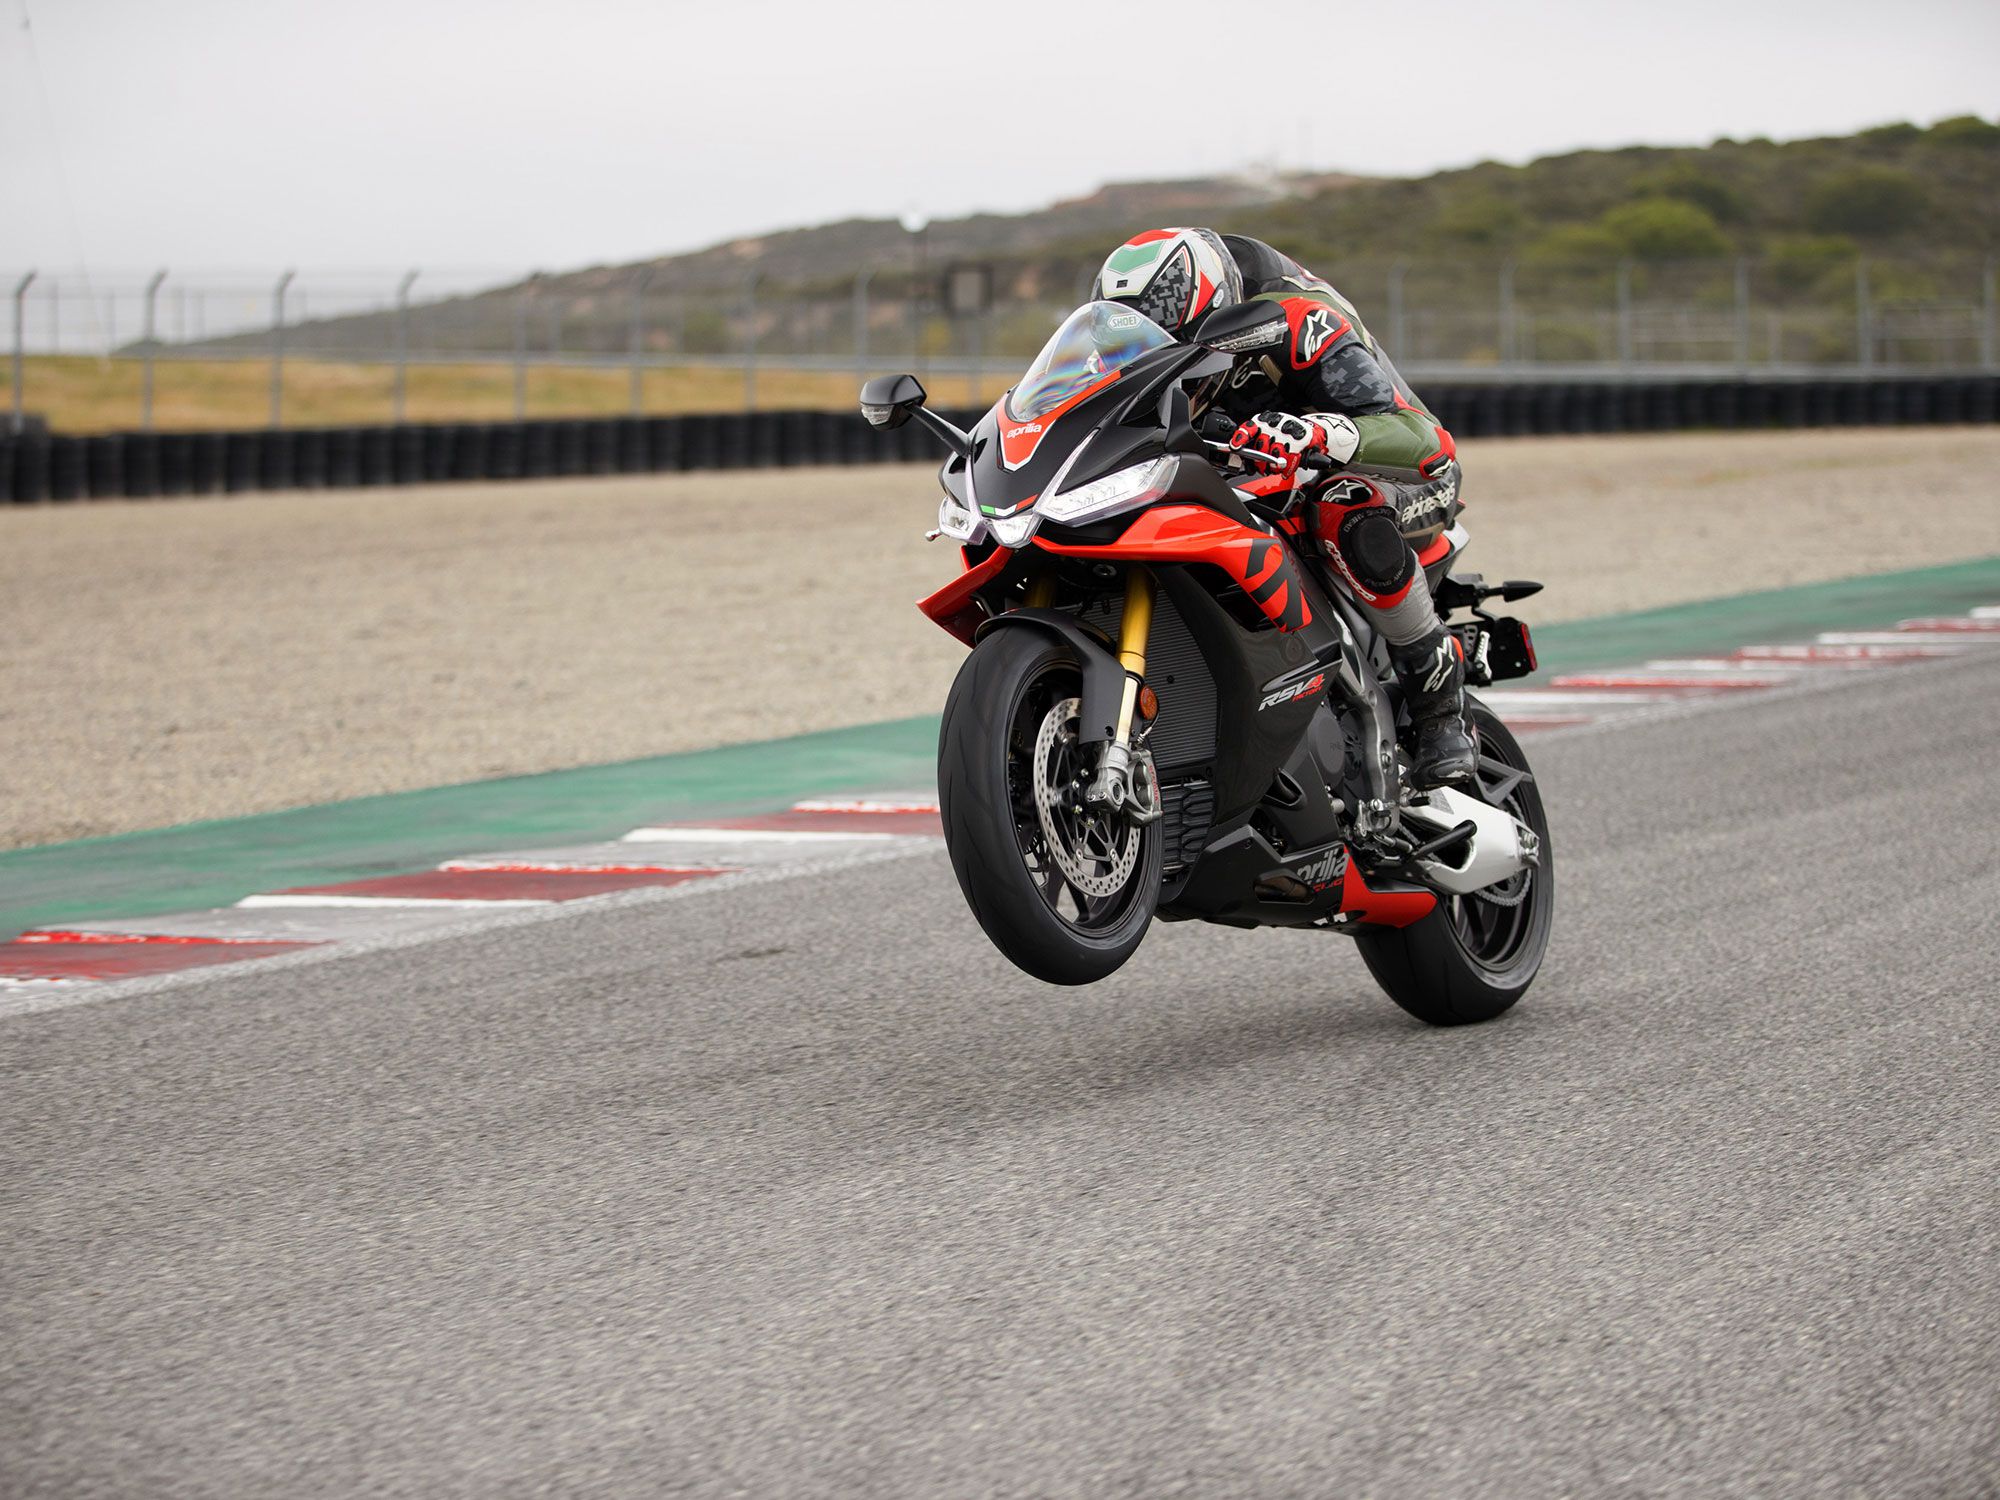 Just when you think it can’t build ’em any faster, Aprilia delivers an even more powerful RSV4. It pumps out 190 ponies at the back tire.